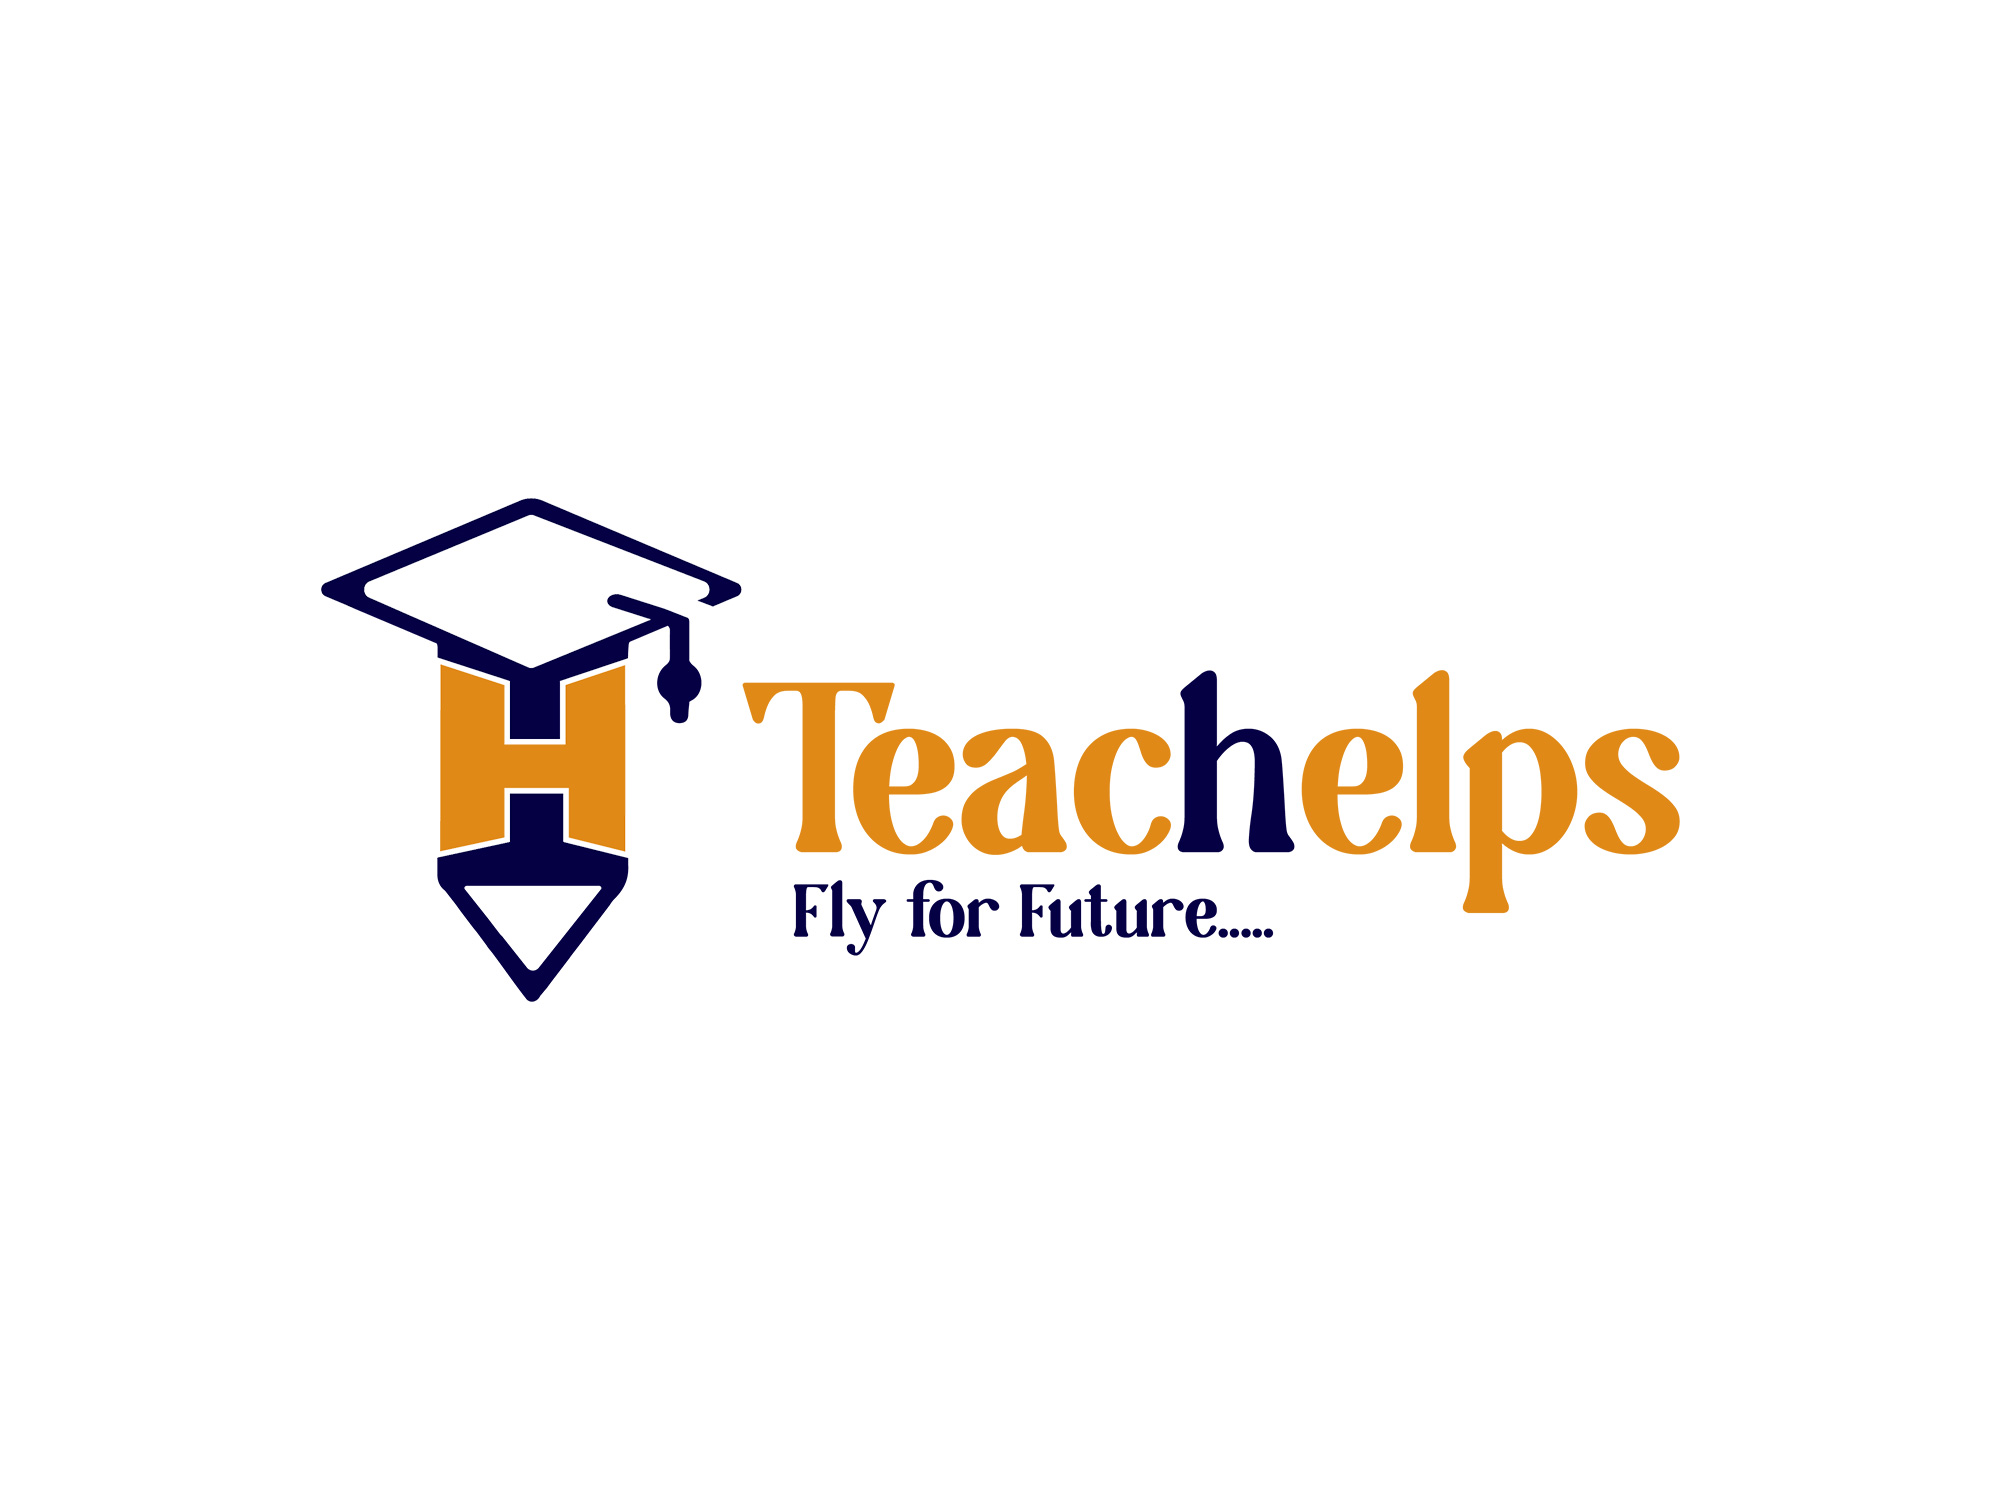 Teach Helps Logo Designing - xpertlab technologies private limited